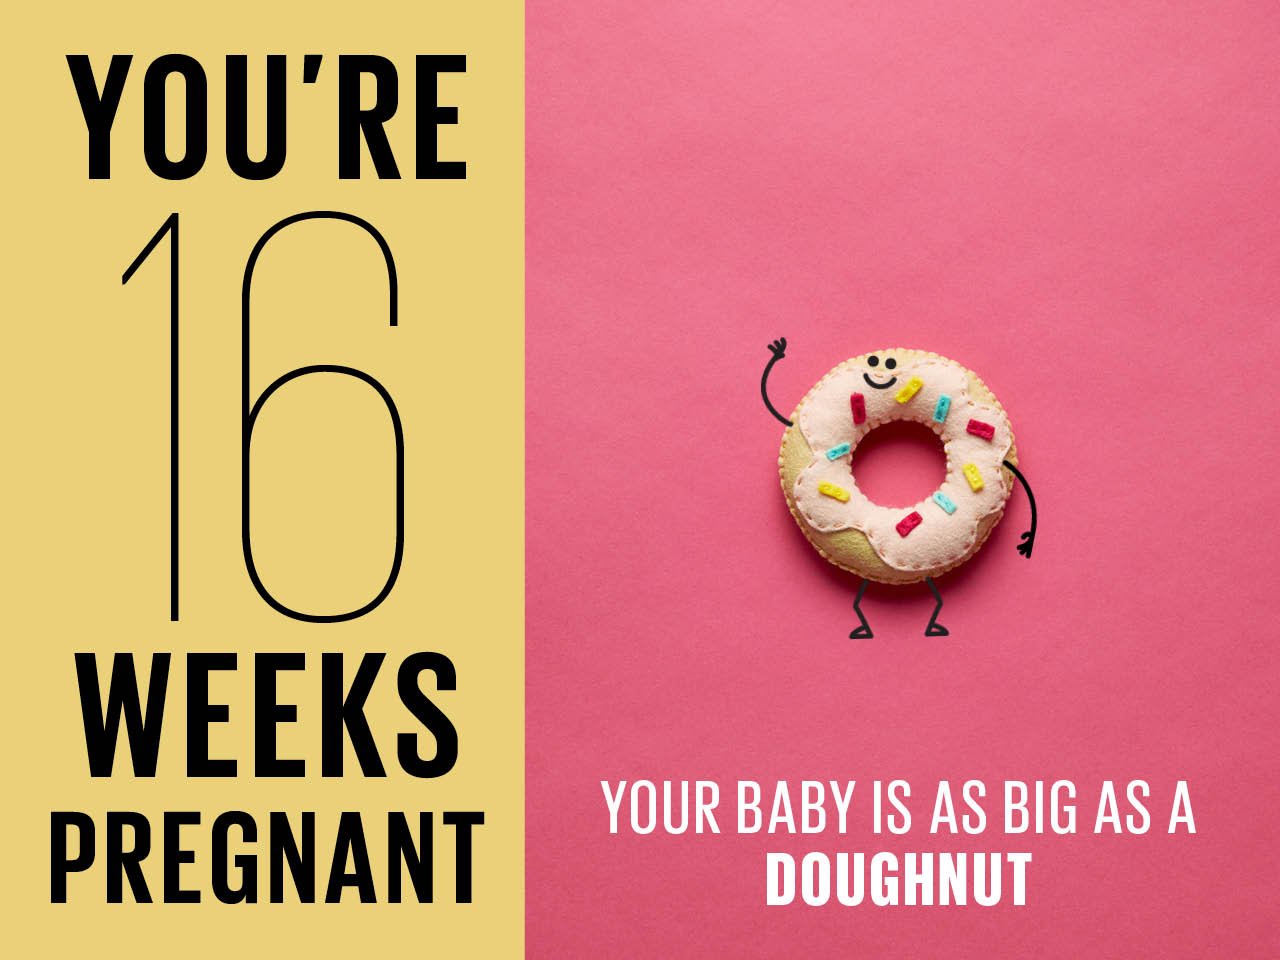 Felt doughnut used to show how big baby is at 16 weeks